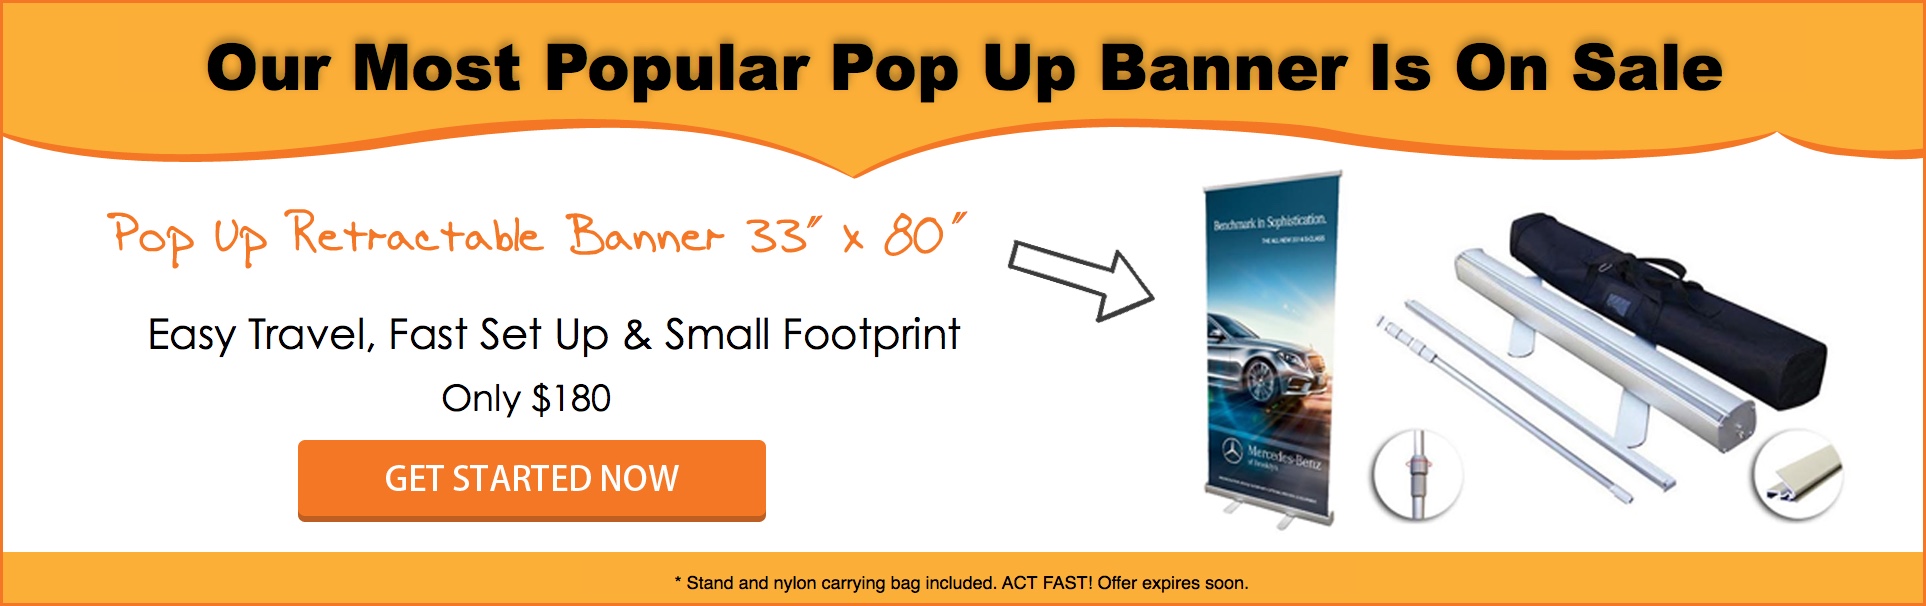 pop-up-retractabe-banner-special-offe